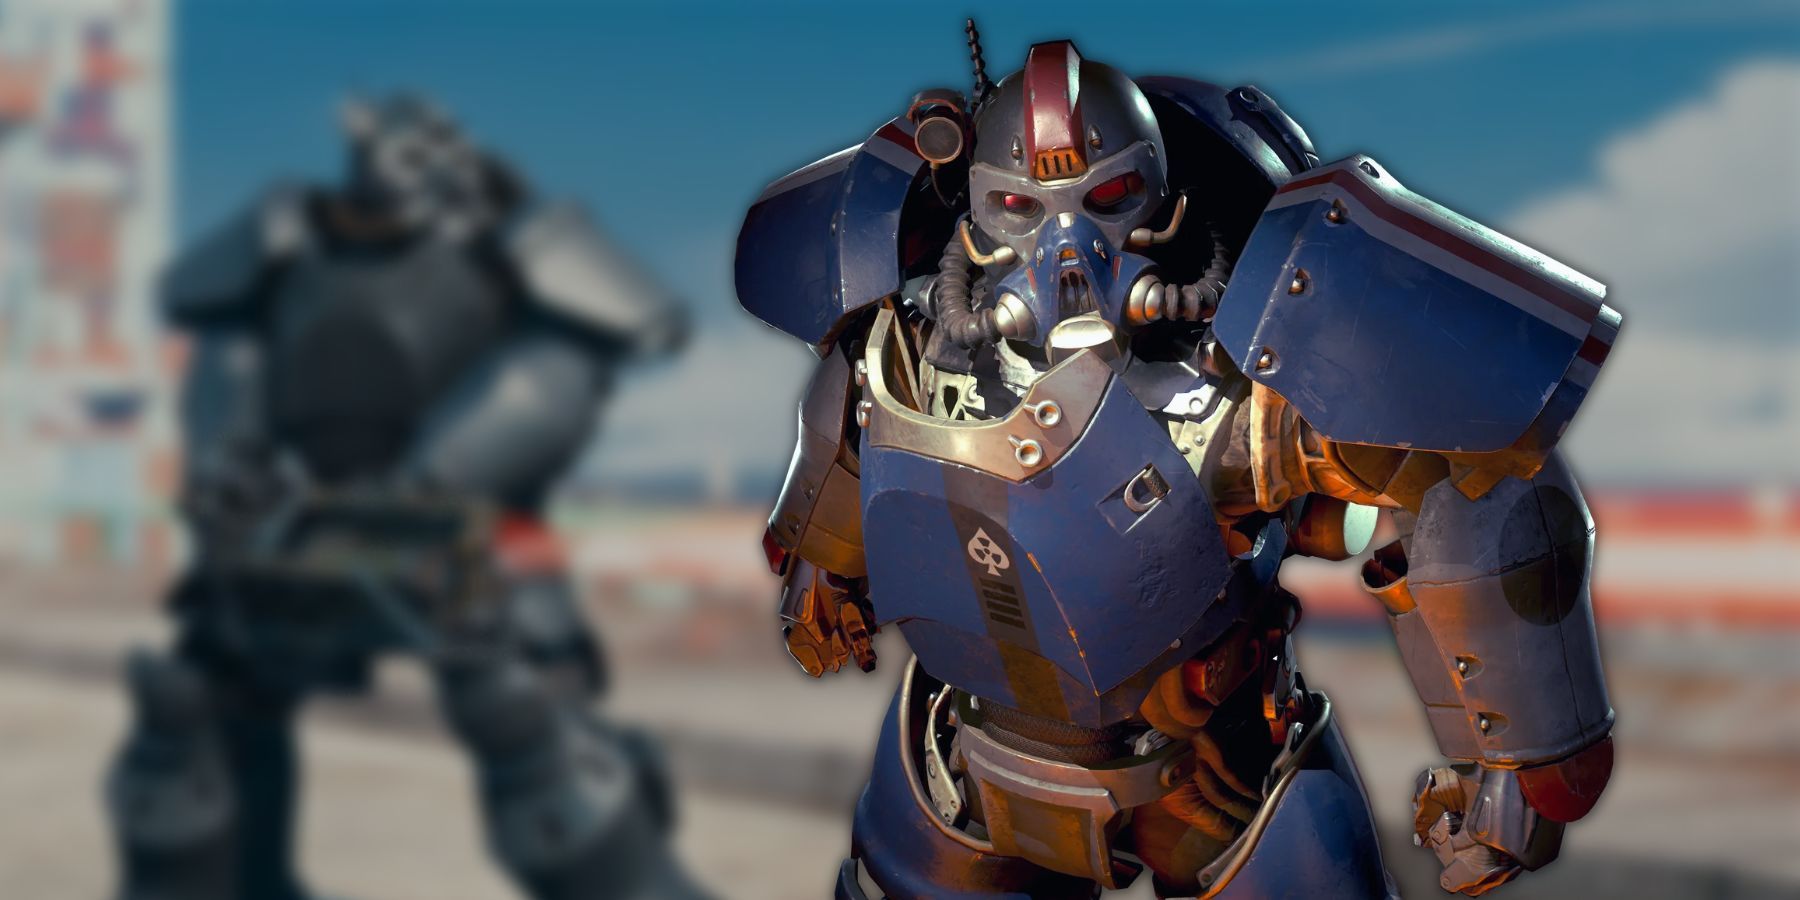 image showing the t-65 power armor in fallout 76.